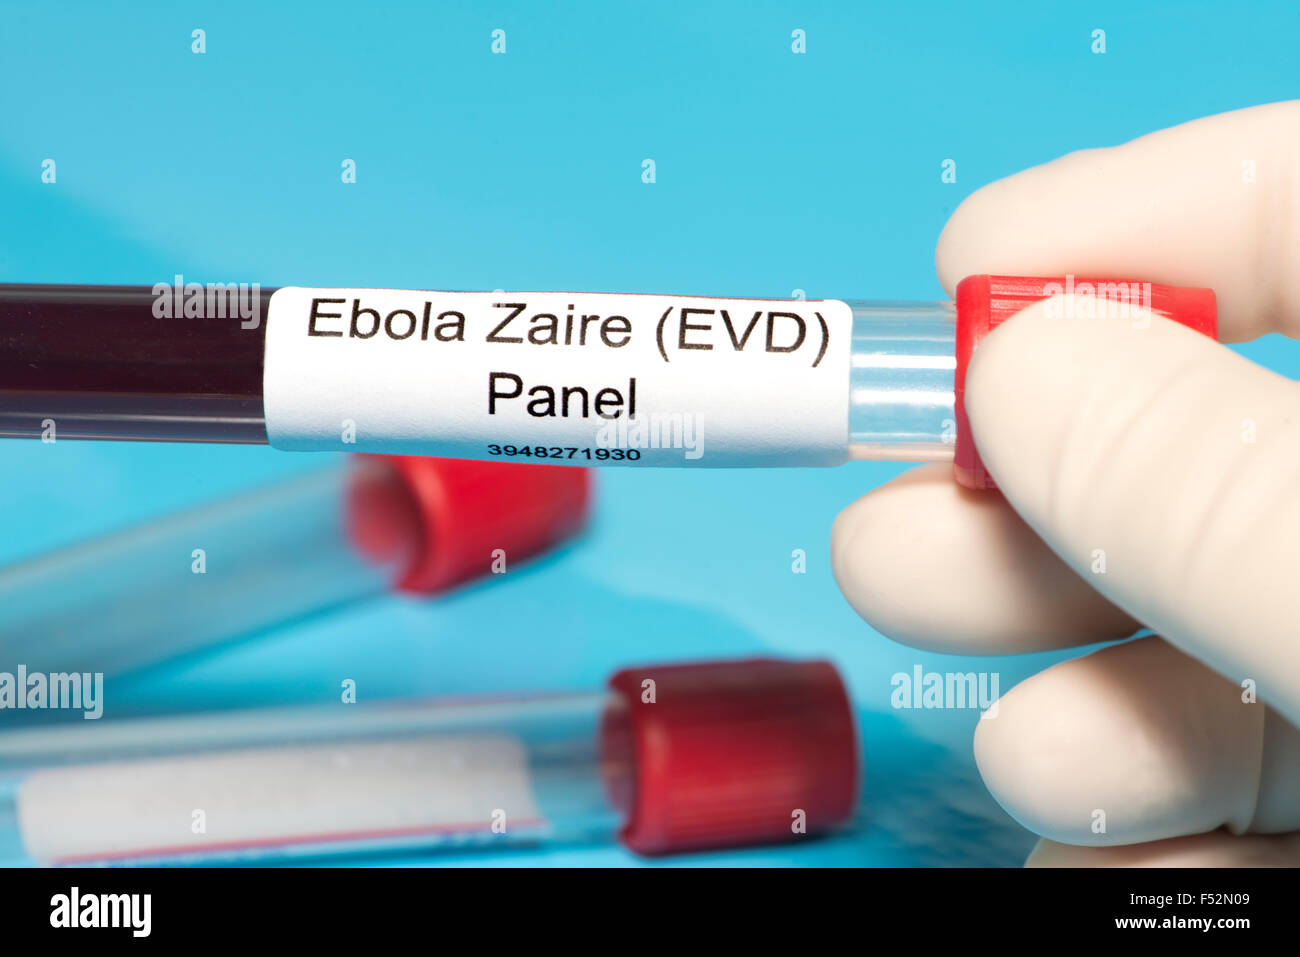 Technician holds Ebola Zaire blood test panel lab sample. Label is fictitious. Stock Photo